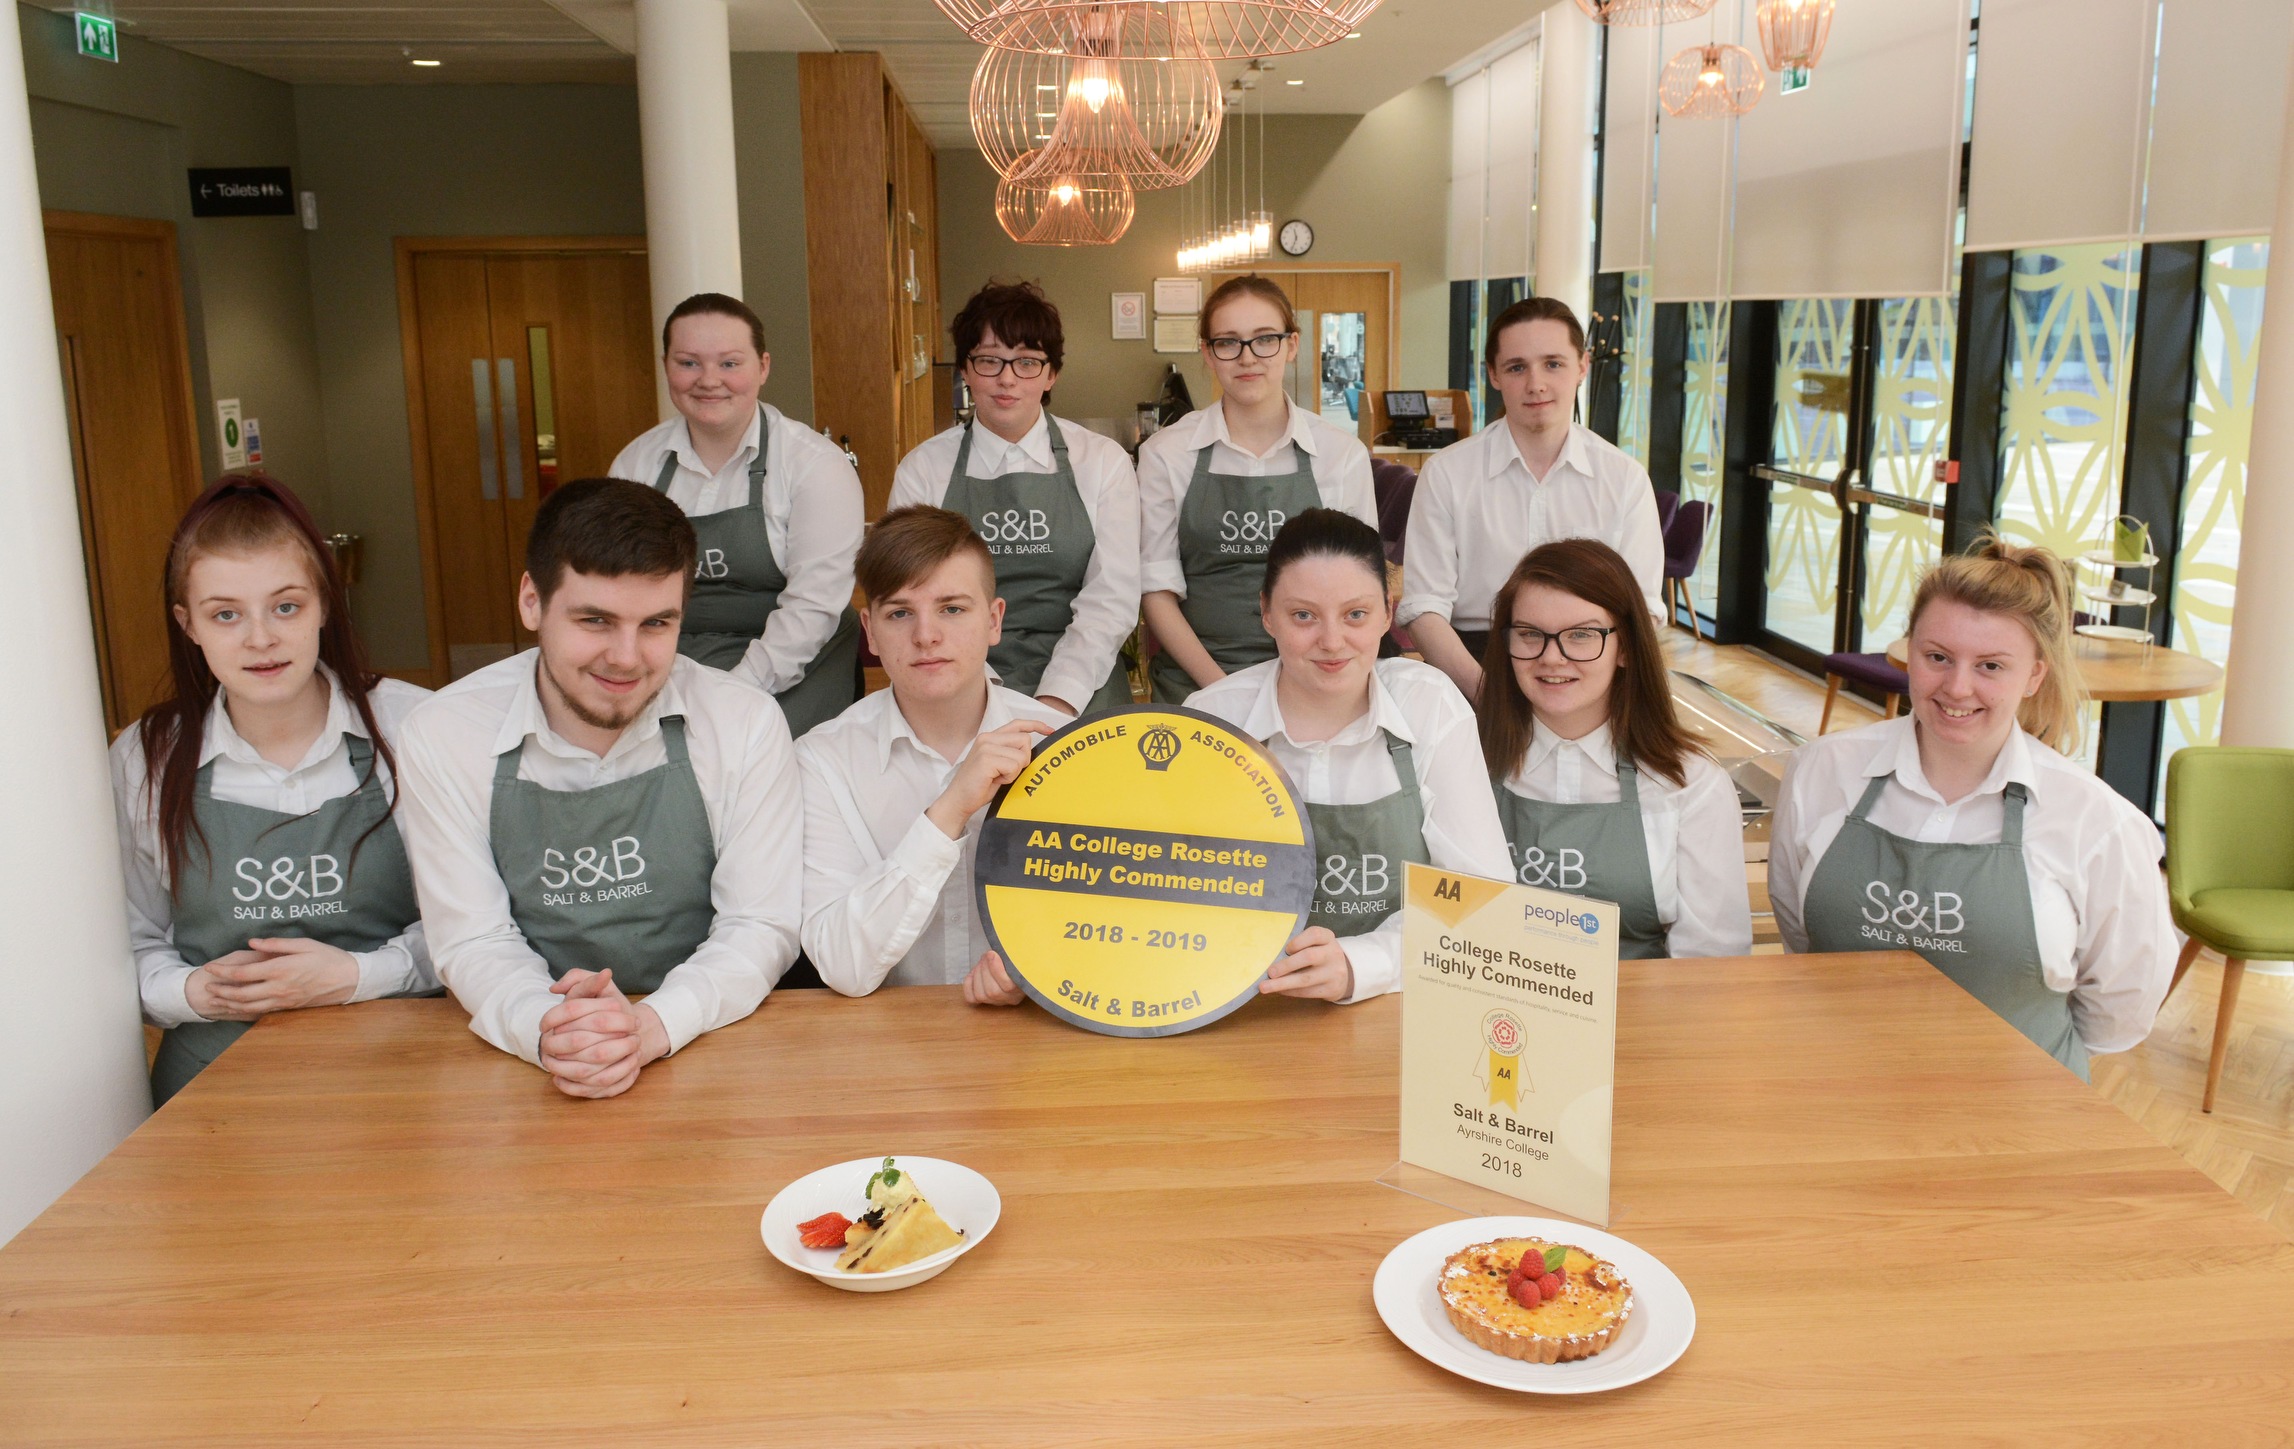 Salt & Barrel hospitality students with the AA College Rosette